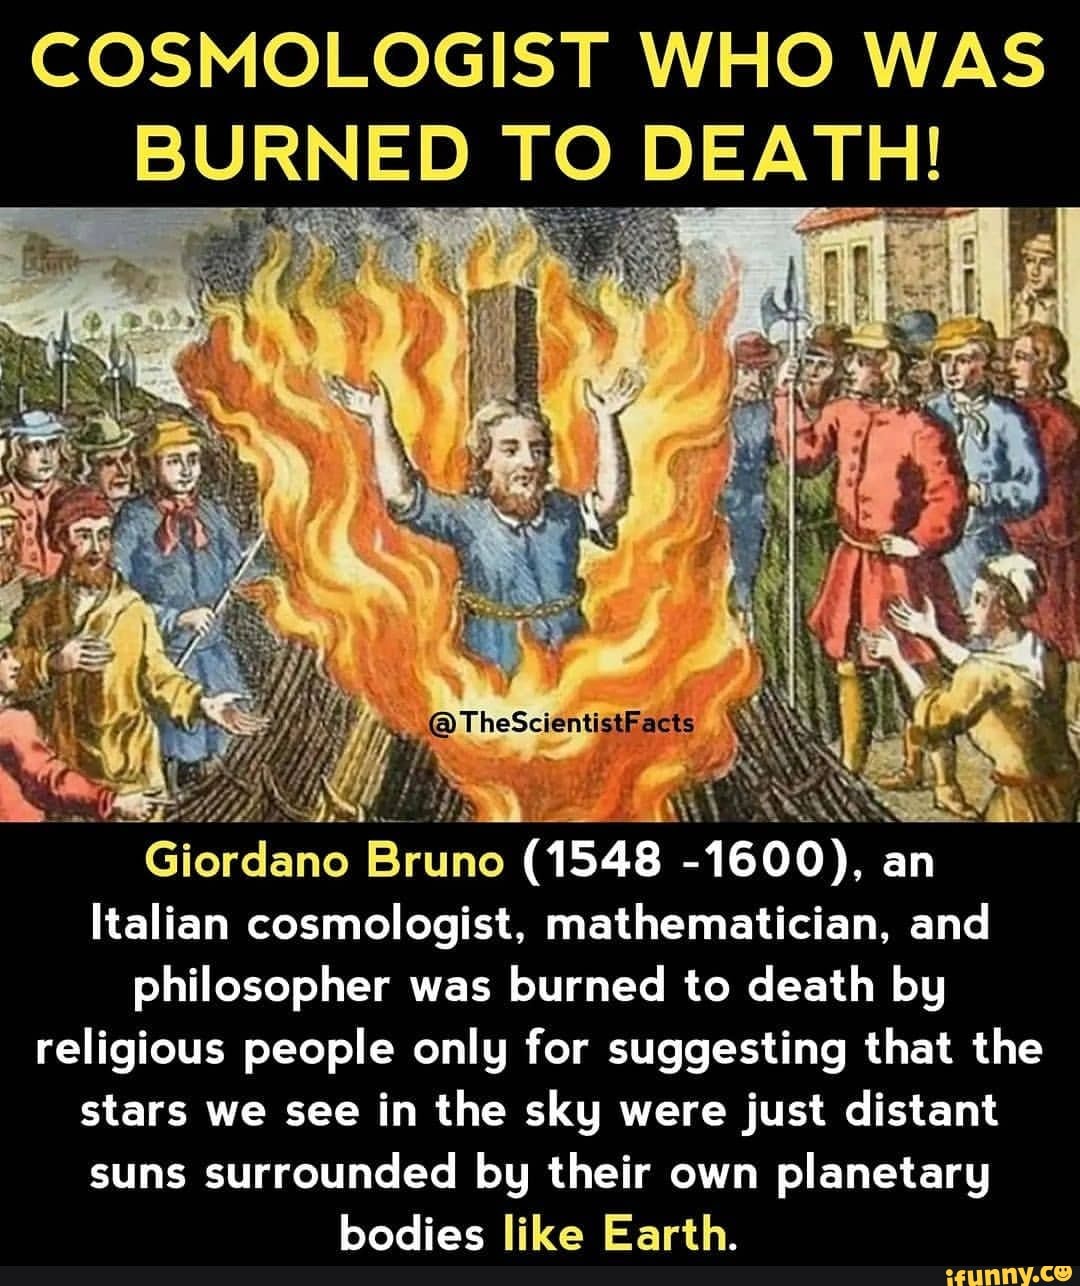 COSMOLOGIST WHO WAS BURNED TO DEATH! Giordano Bruno (1548 -1600), an Italian cosmologist, mathematician, and philosopher